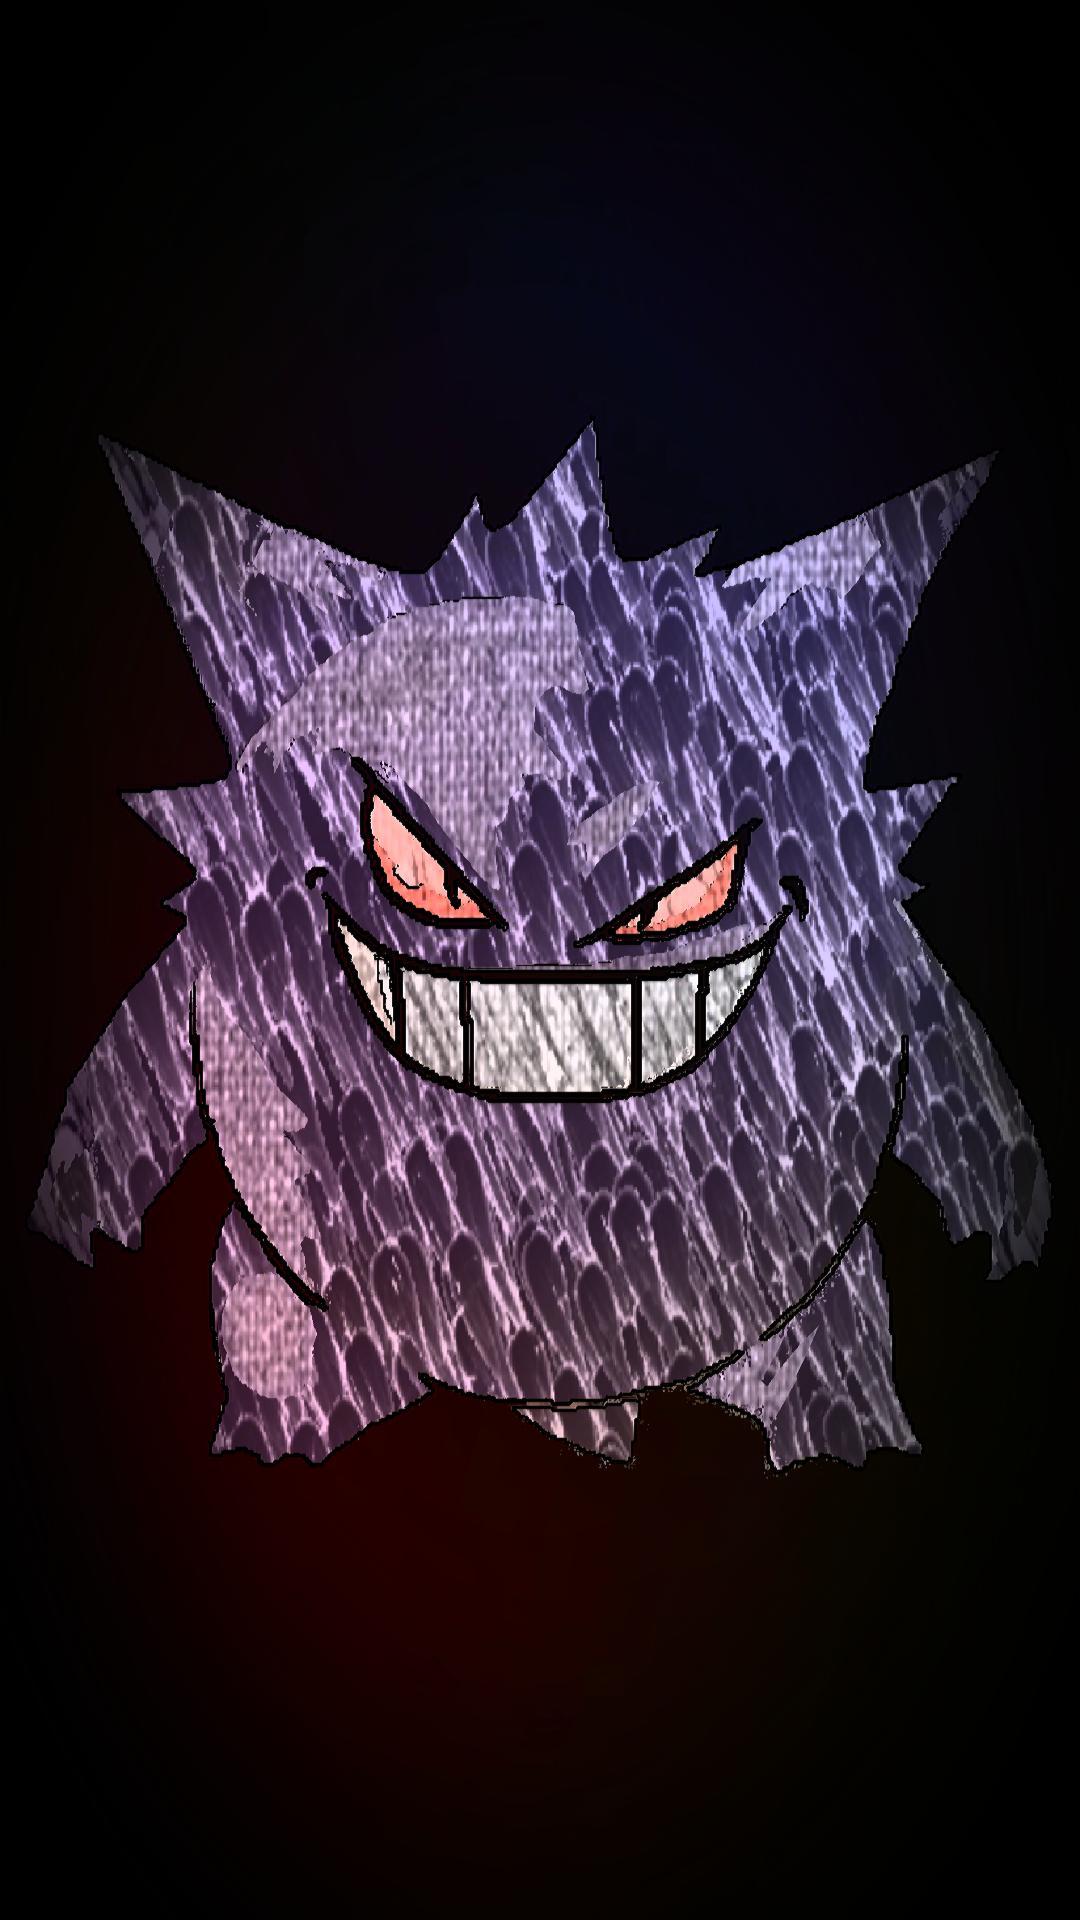 An edit of a Gengar for a phone wallpaper, requested by